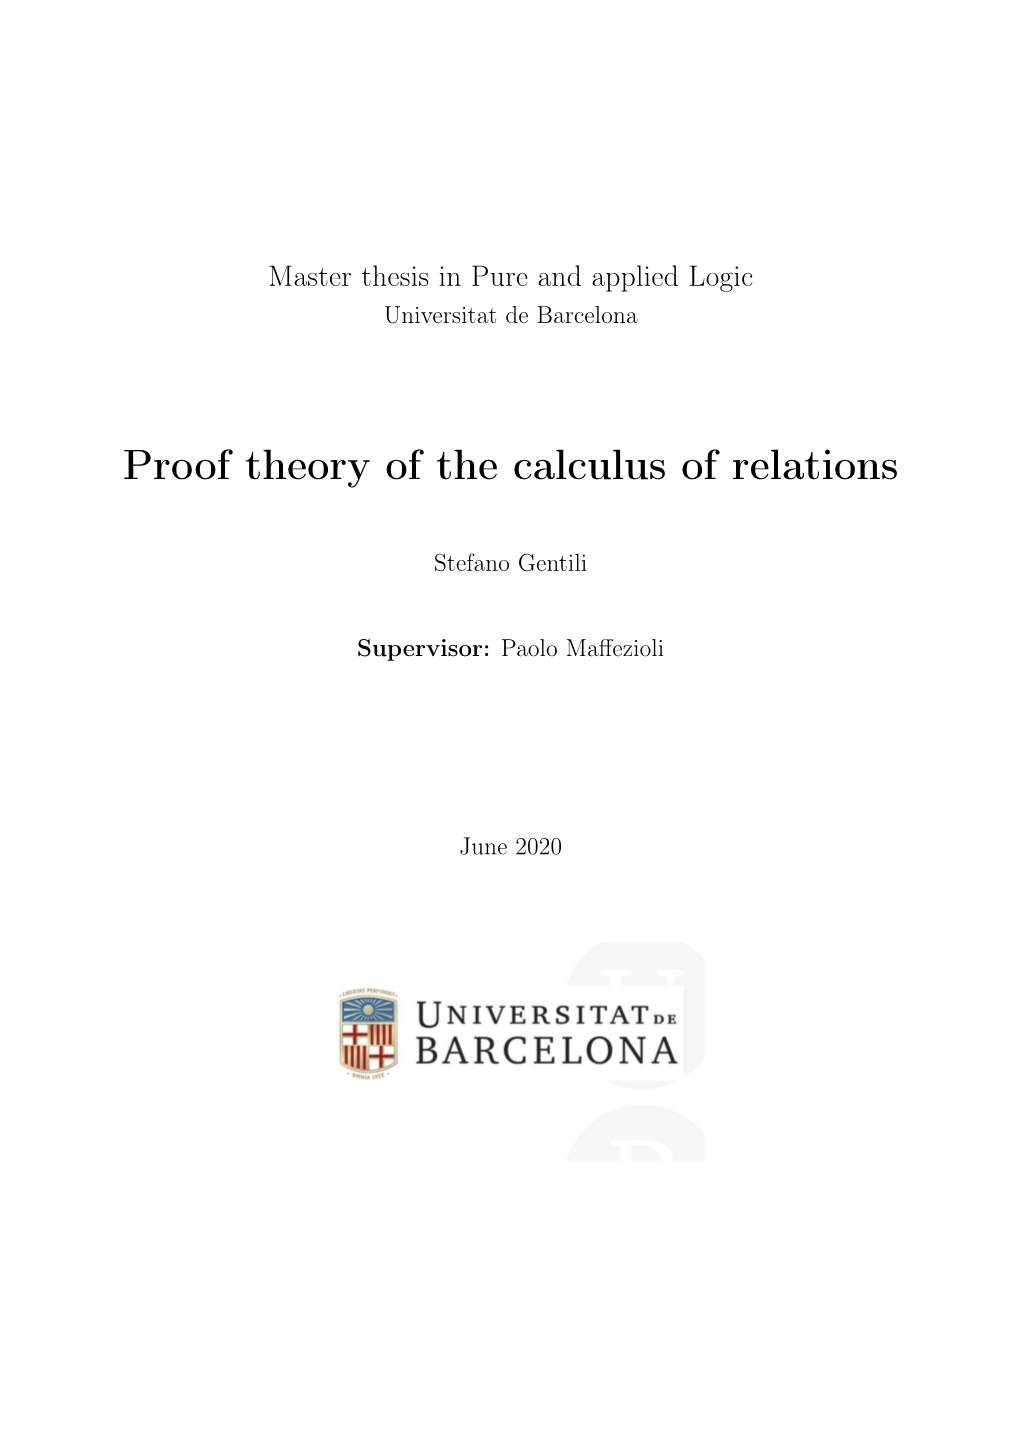 Proof Theory of the Calculus of Relations